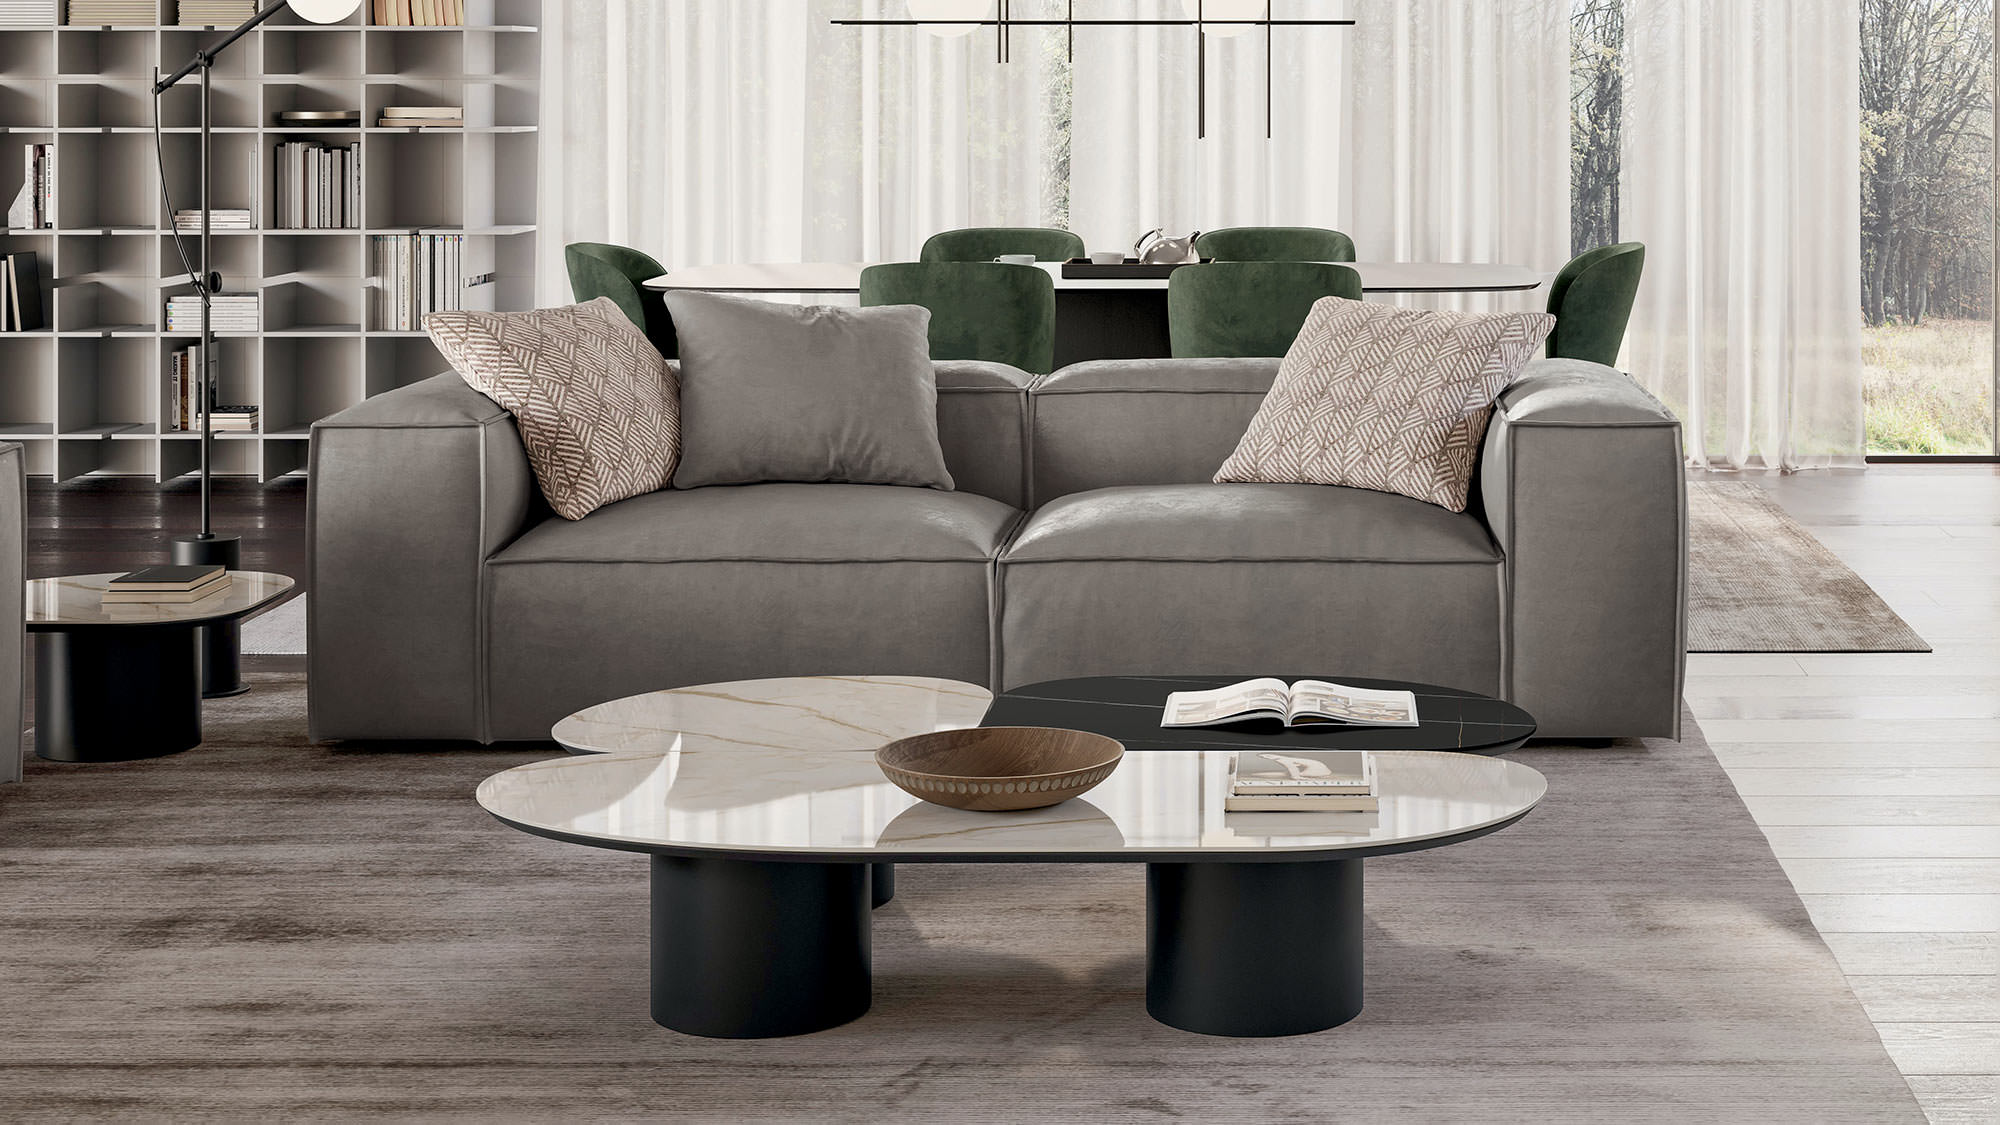 Living room with Comfort sofa and Atollo coffee tables | Dallagnese